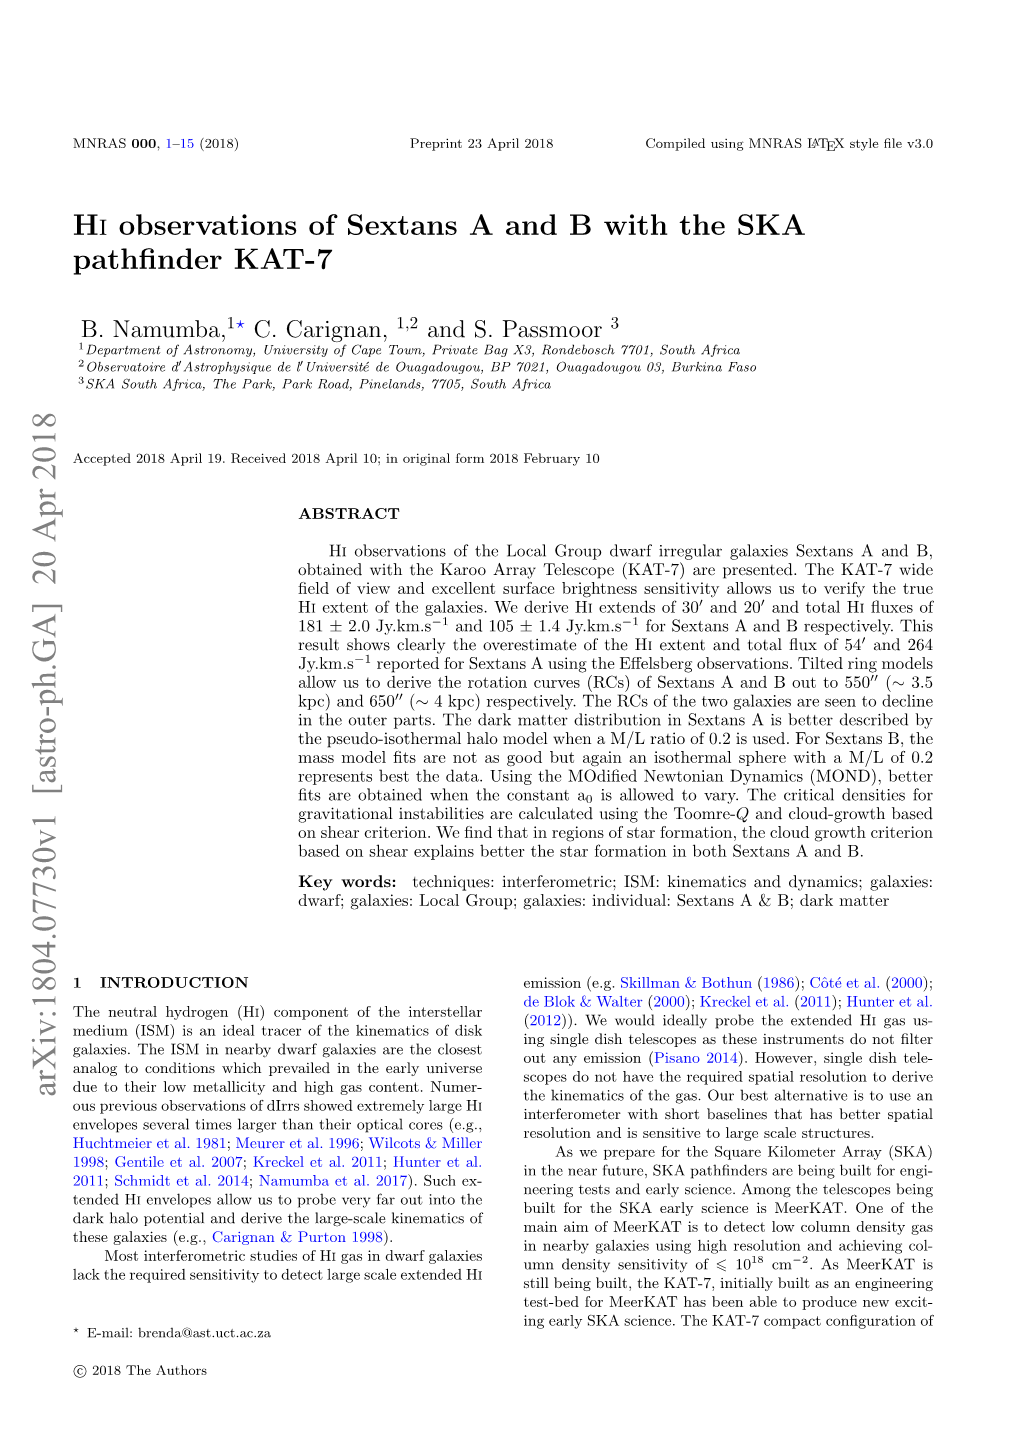 HI Observations of Sextans a and B with the SKA Pathfinder KAT-7